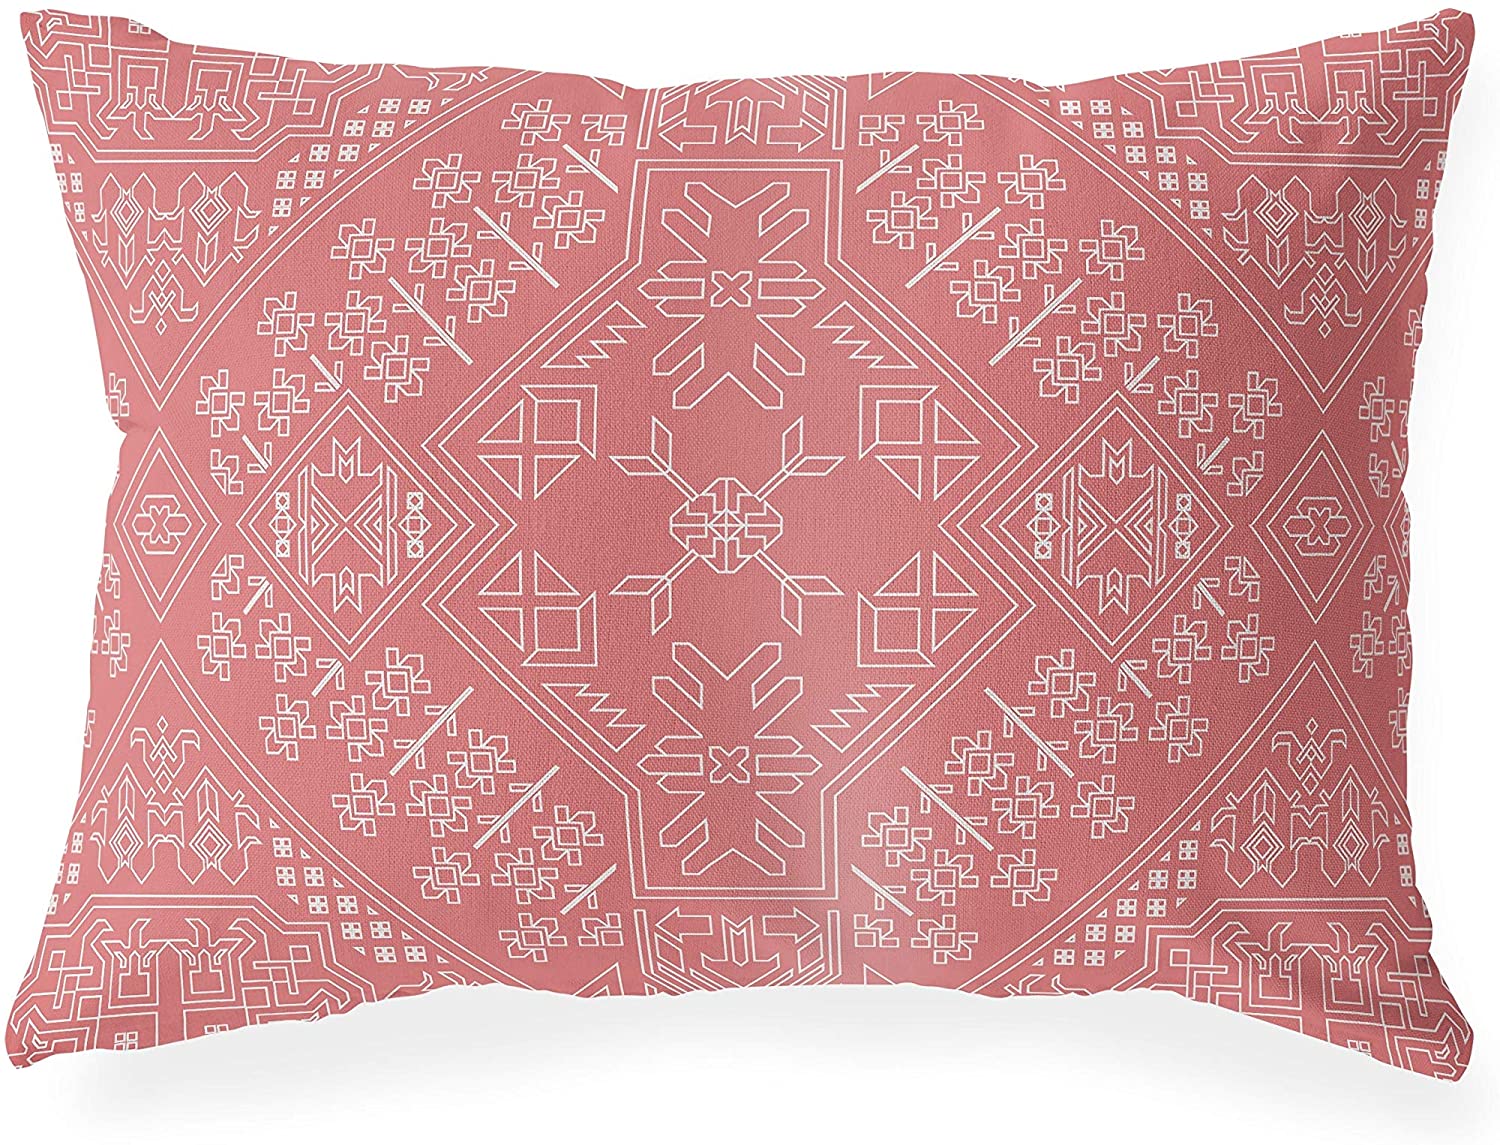 UKN Lumbar Pillow Pink Geometric Southwestern Polyester Single Removable Cover